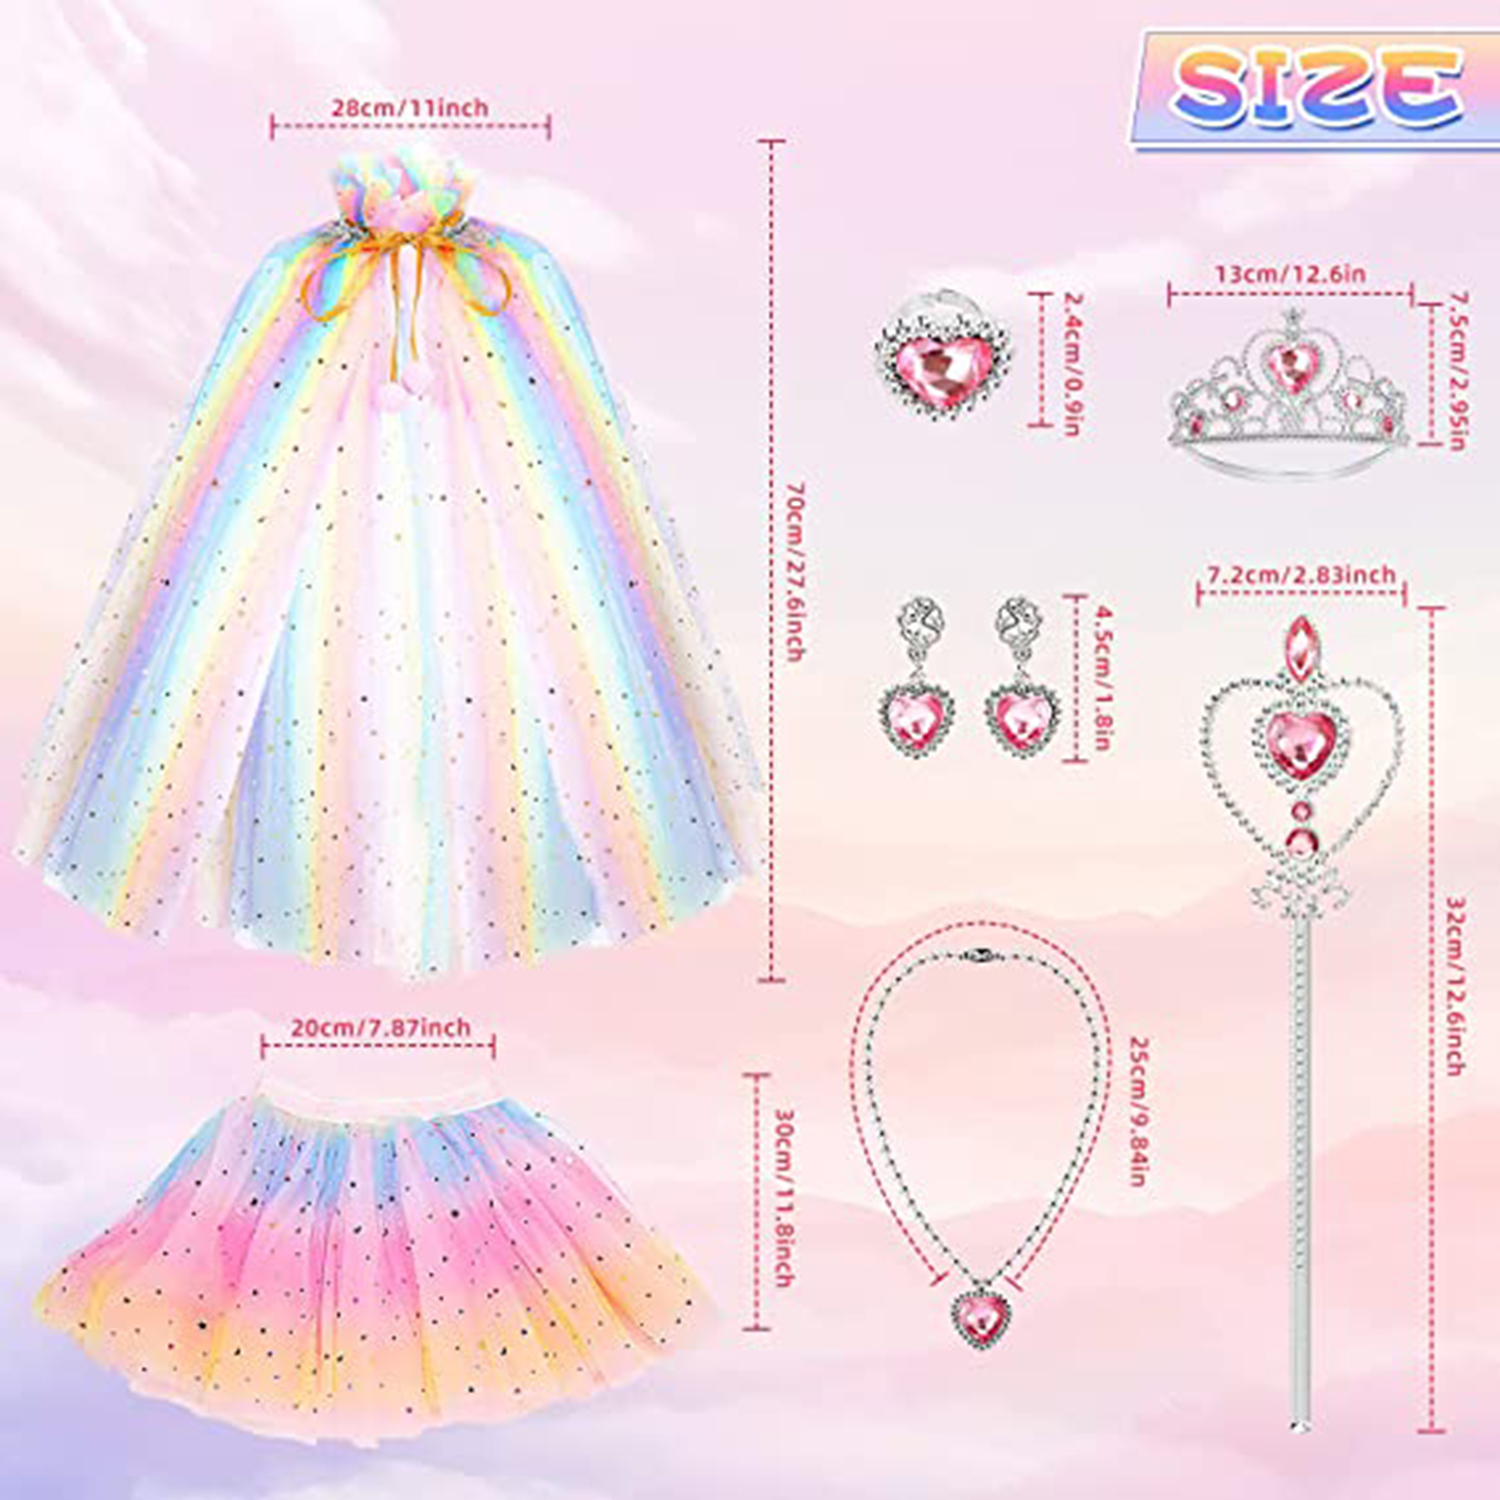 AOXTOY Dress-up Cosplay Toys for Girls, Princess Dress Up Clothes Cape Skirt Set, Pretend Play Princess Dress Cloak Jewelry Crown Wand - image 5 of 12